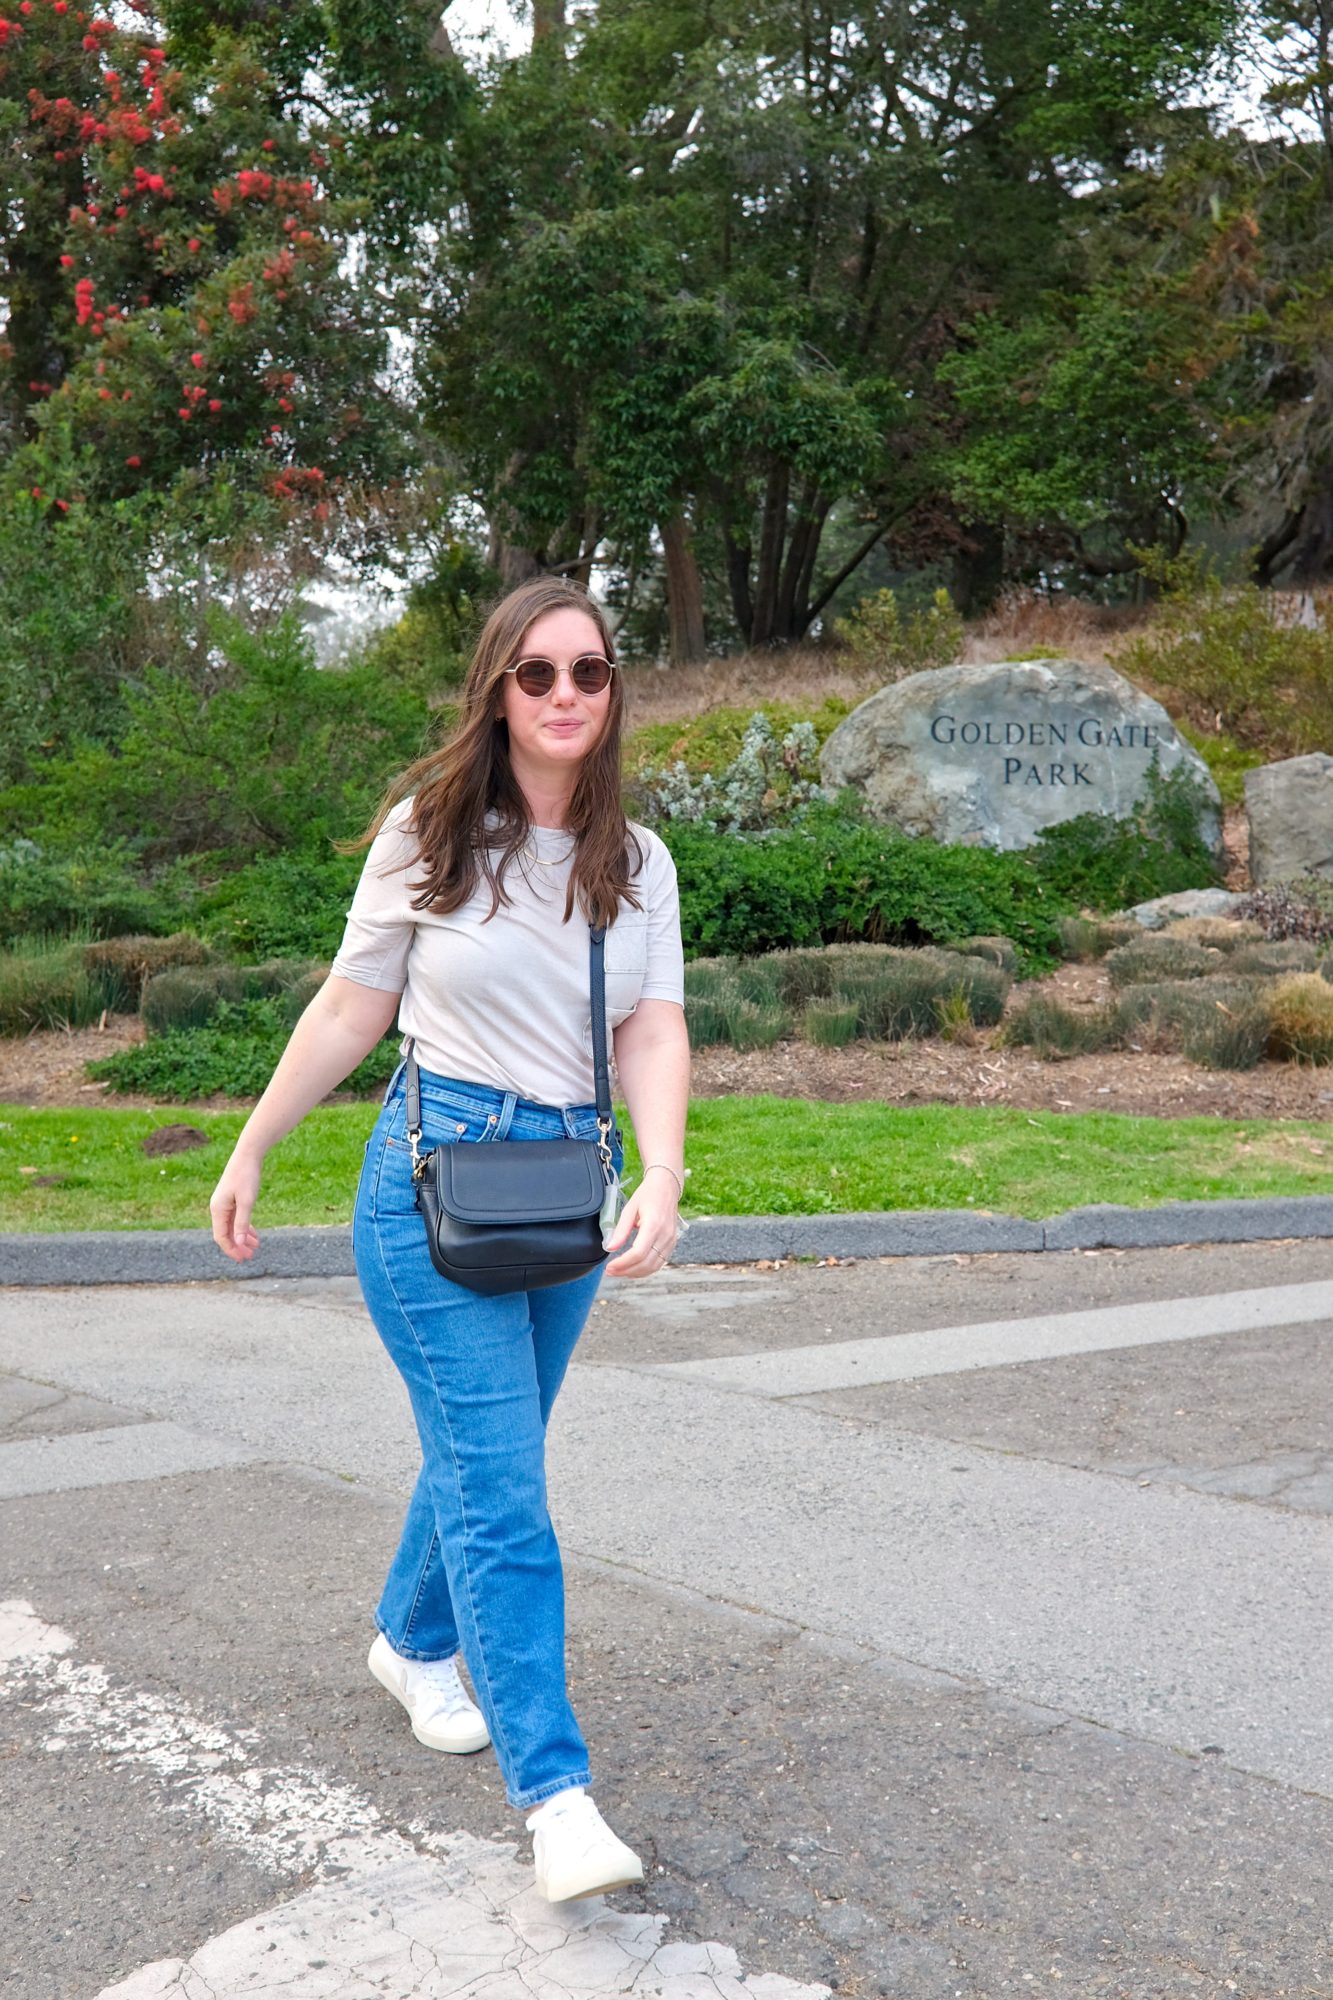 Alyssa wears an off-white tee with blue jeans in Golden Gate Park